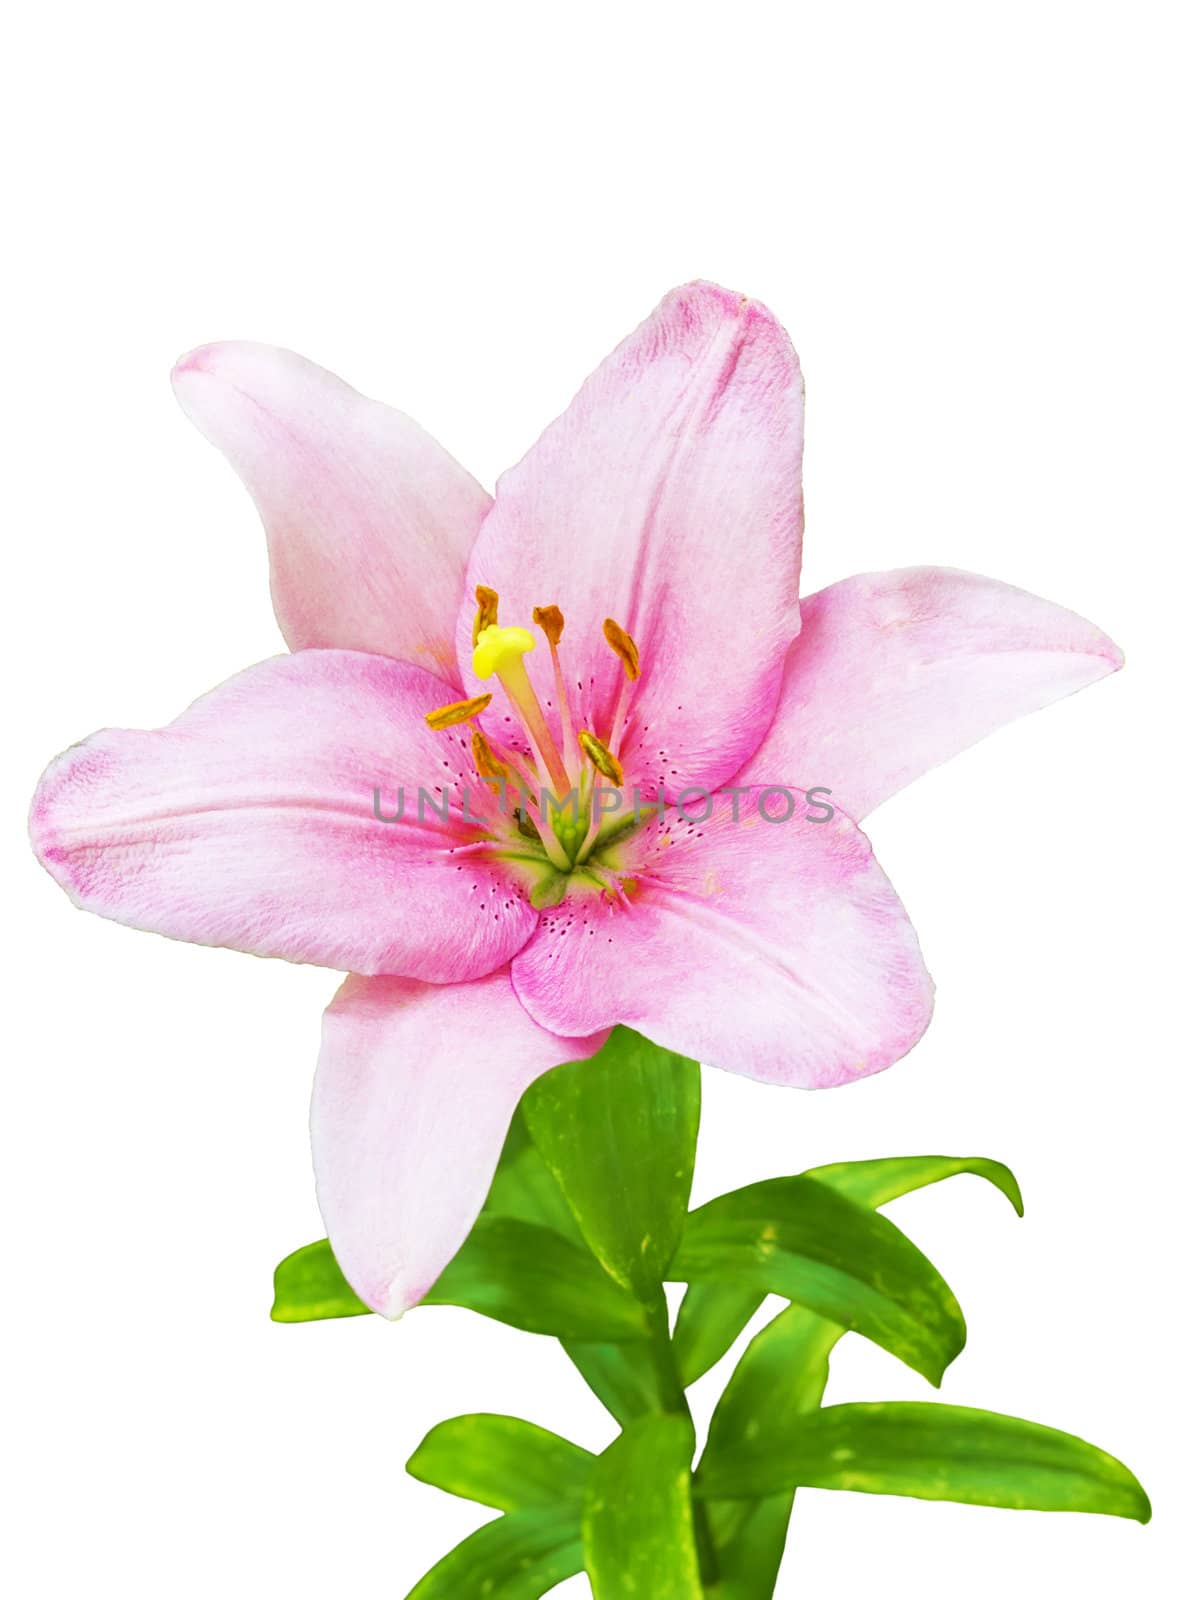 royal lily flower isolated on a white background